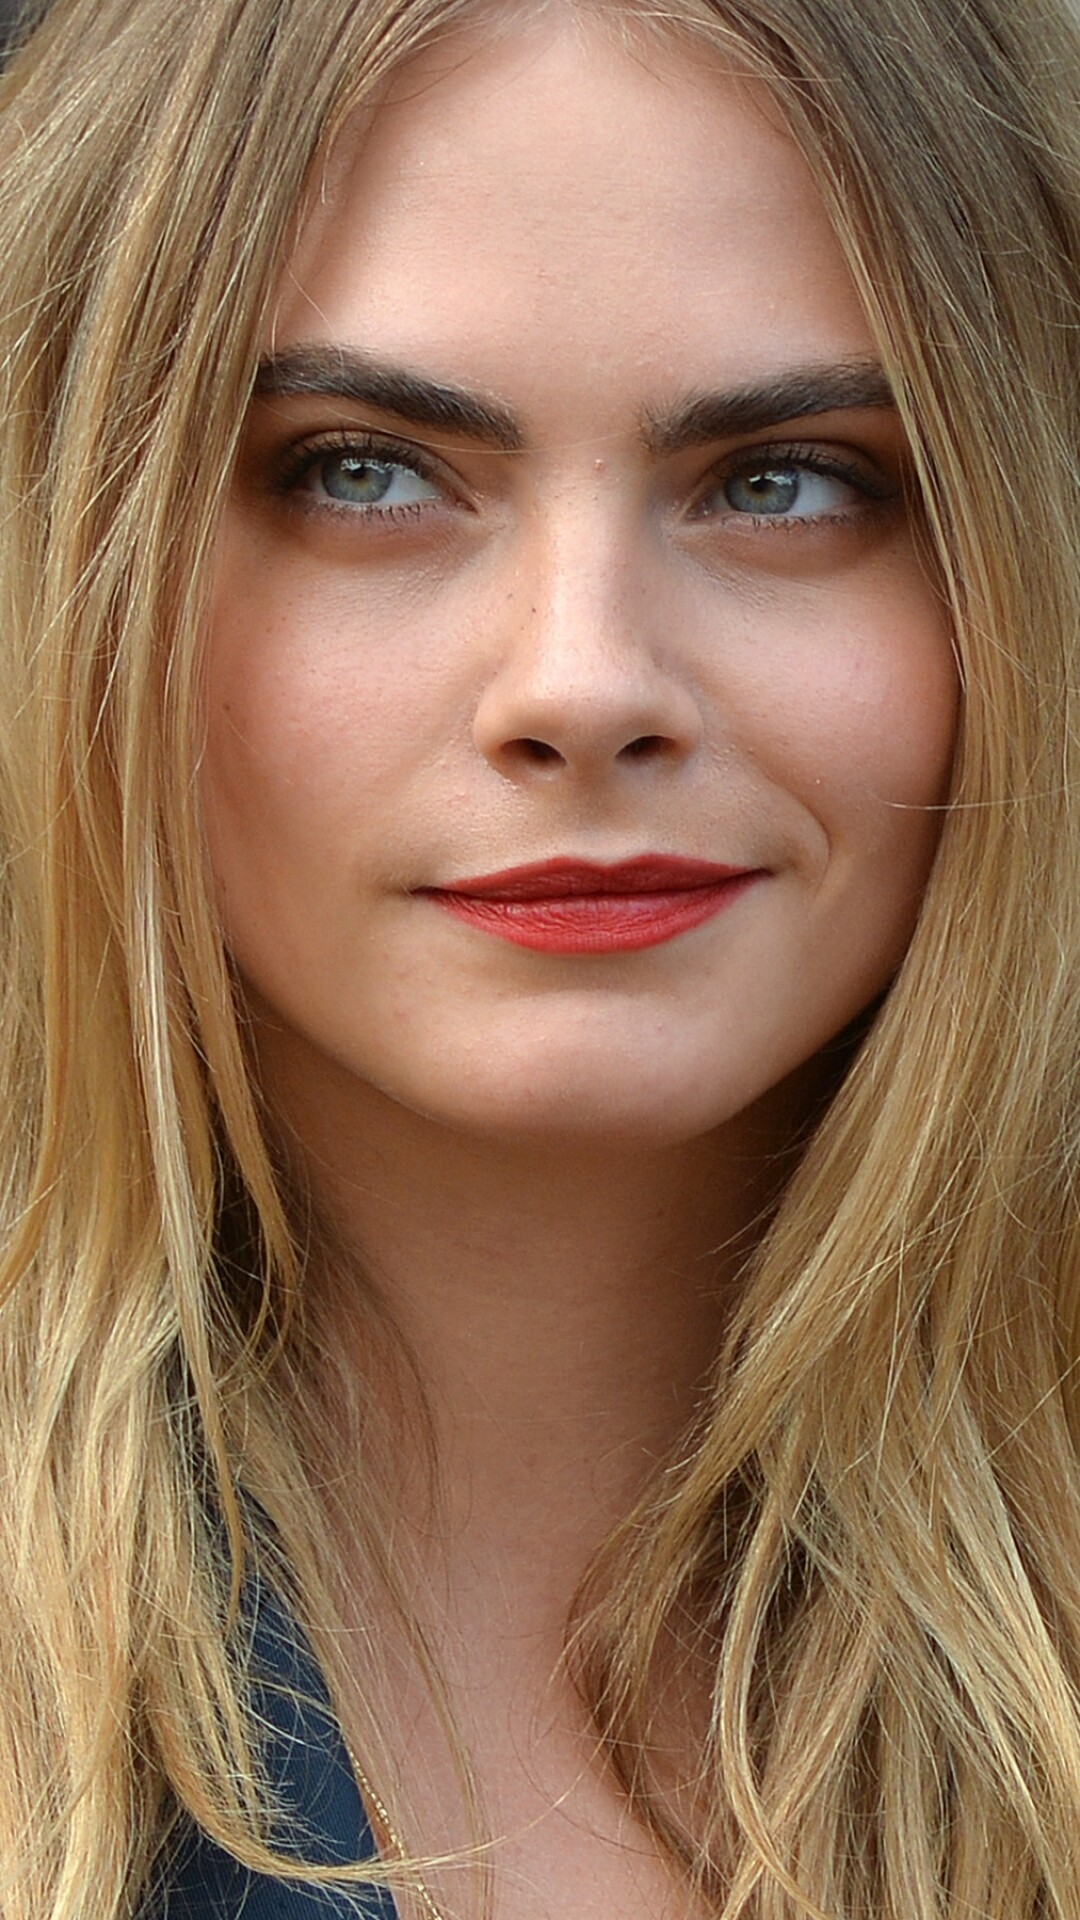 Cara Delevingne: The supermodel-turned-actor, Fashion. 1080x1920 Full HD Background.